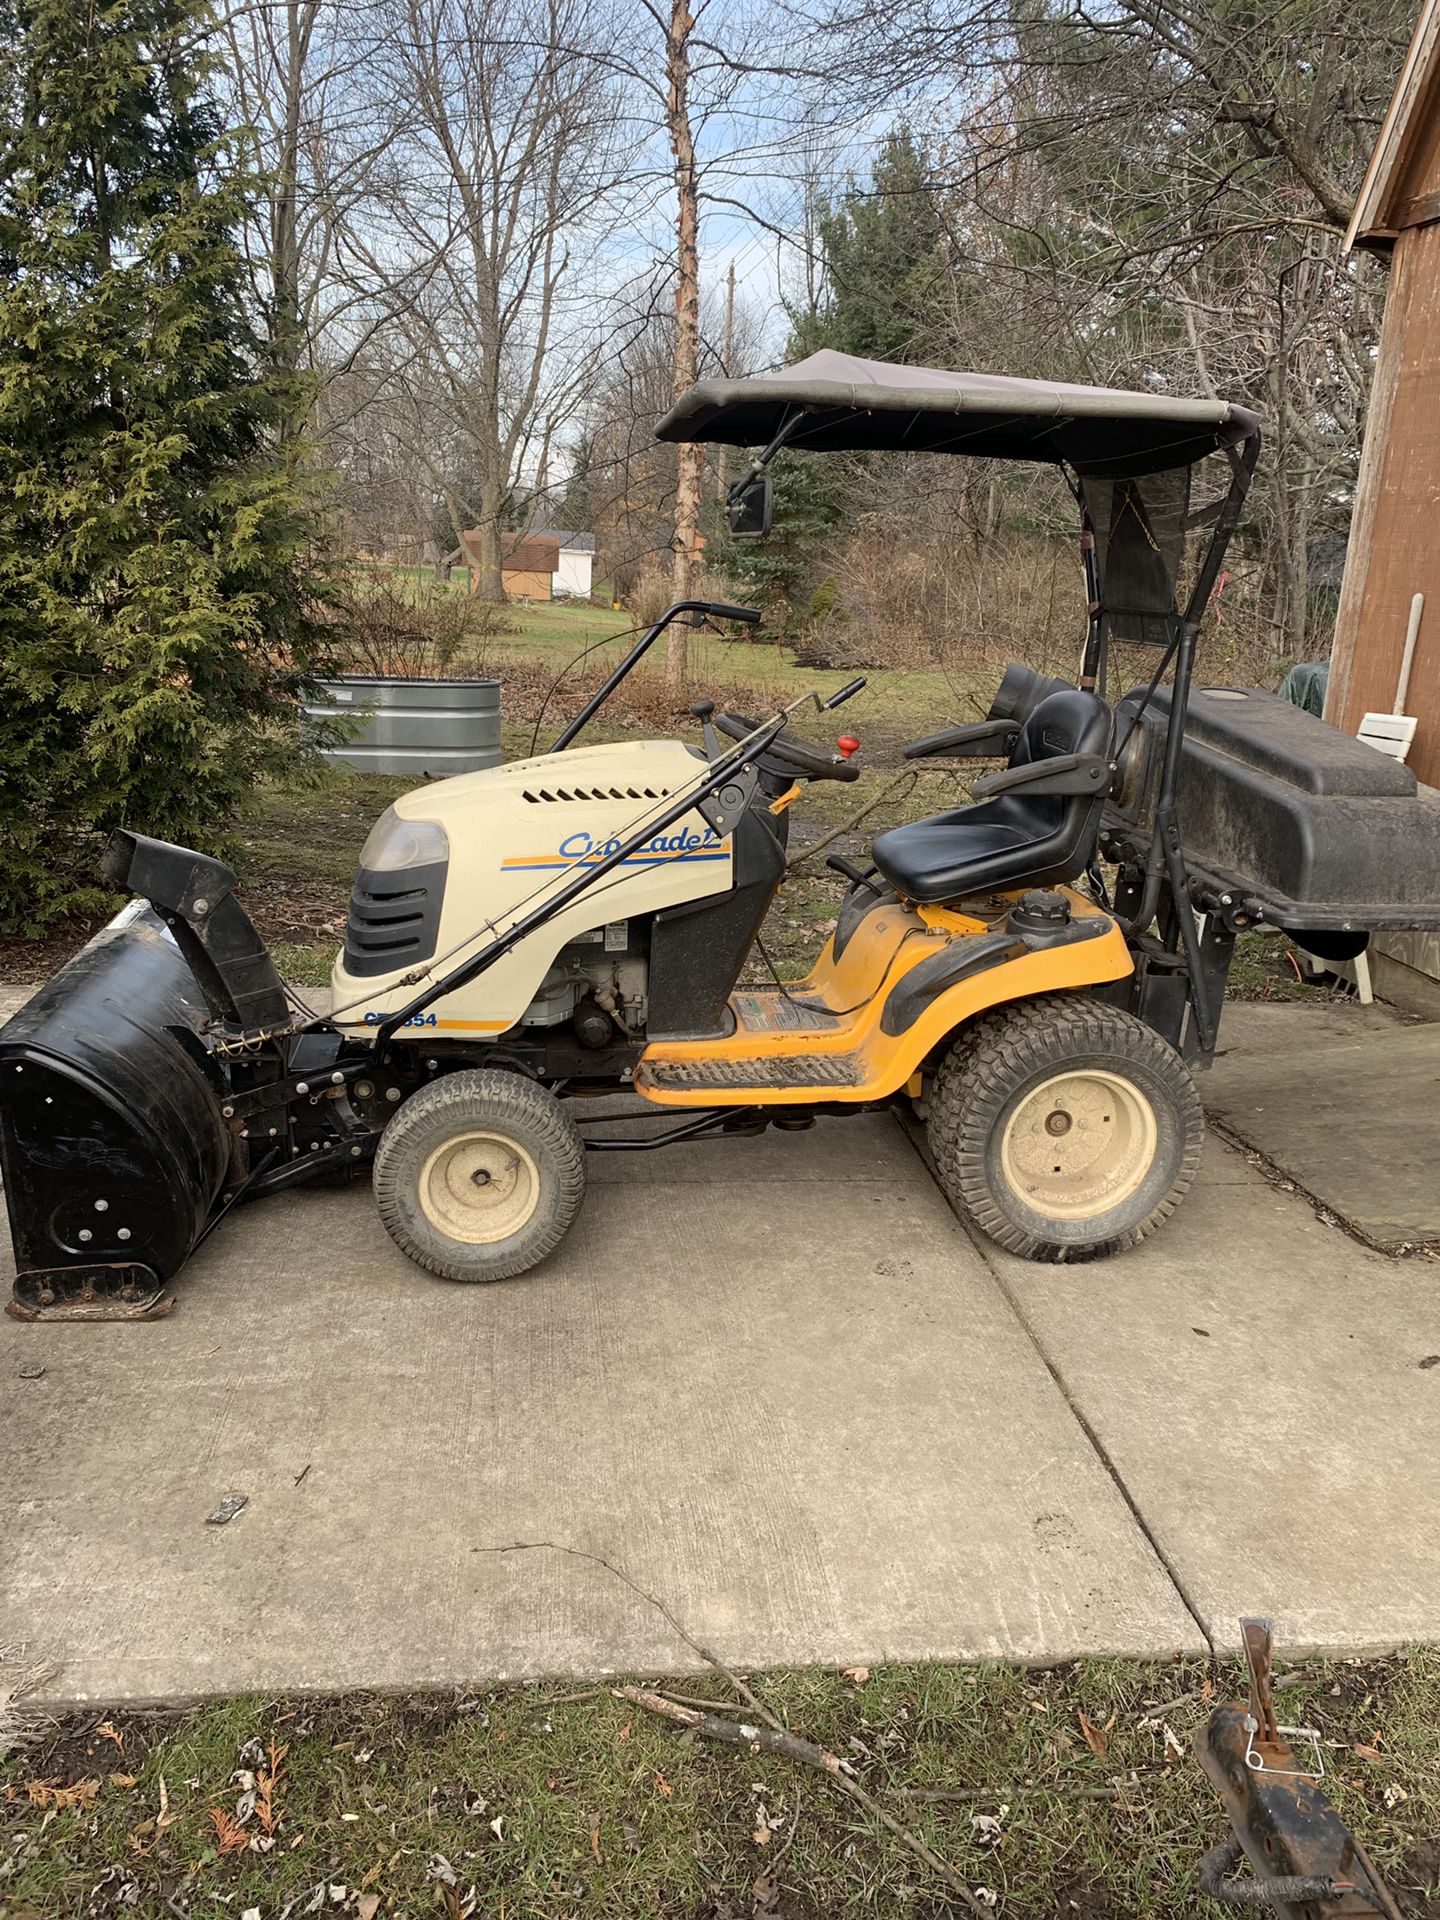 Cub Cadet 1554 w/ snowblower and attachments